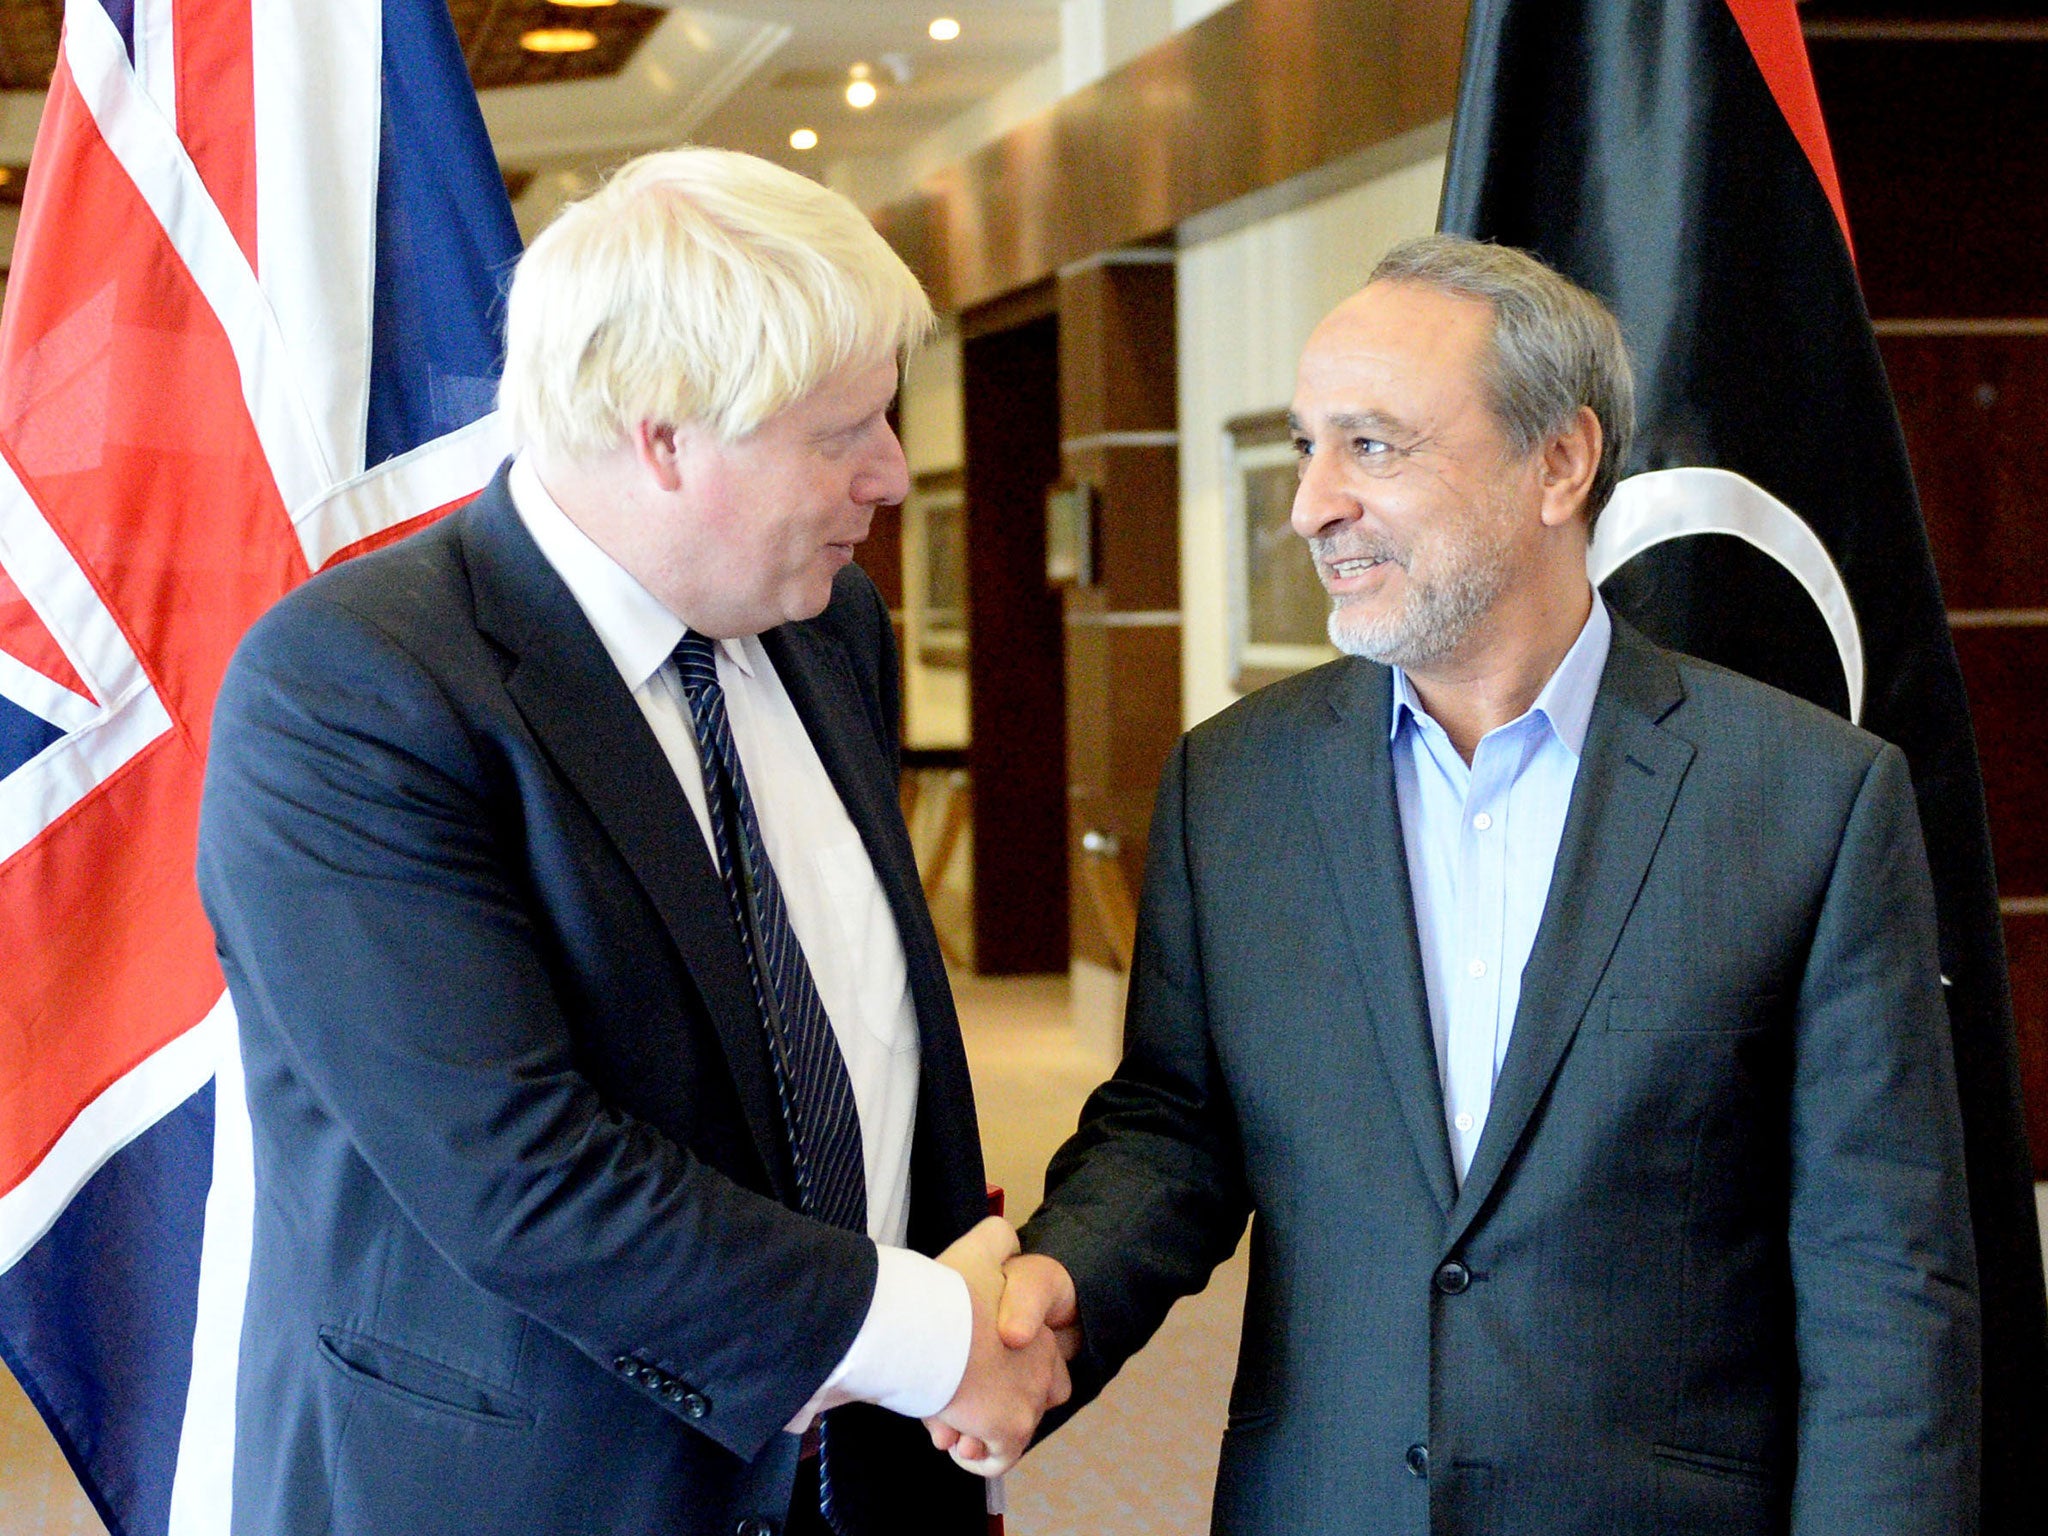 Boris Johnson shakes hands with chairman of the Libyan High Council of State, Abdulrahman Asswehly, in Tripoli on Wednesday